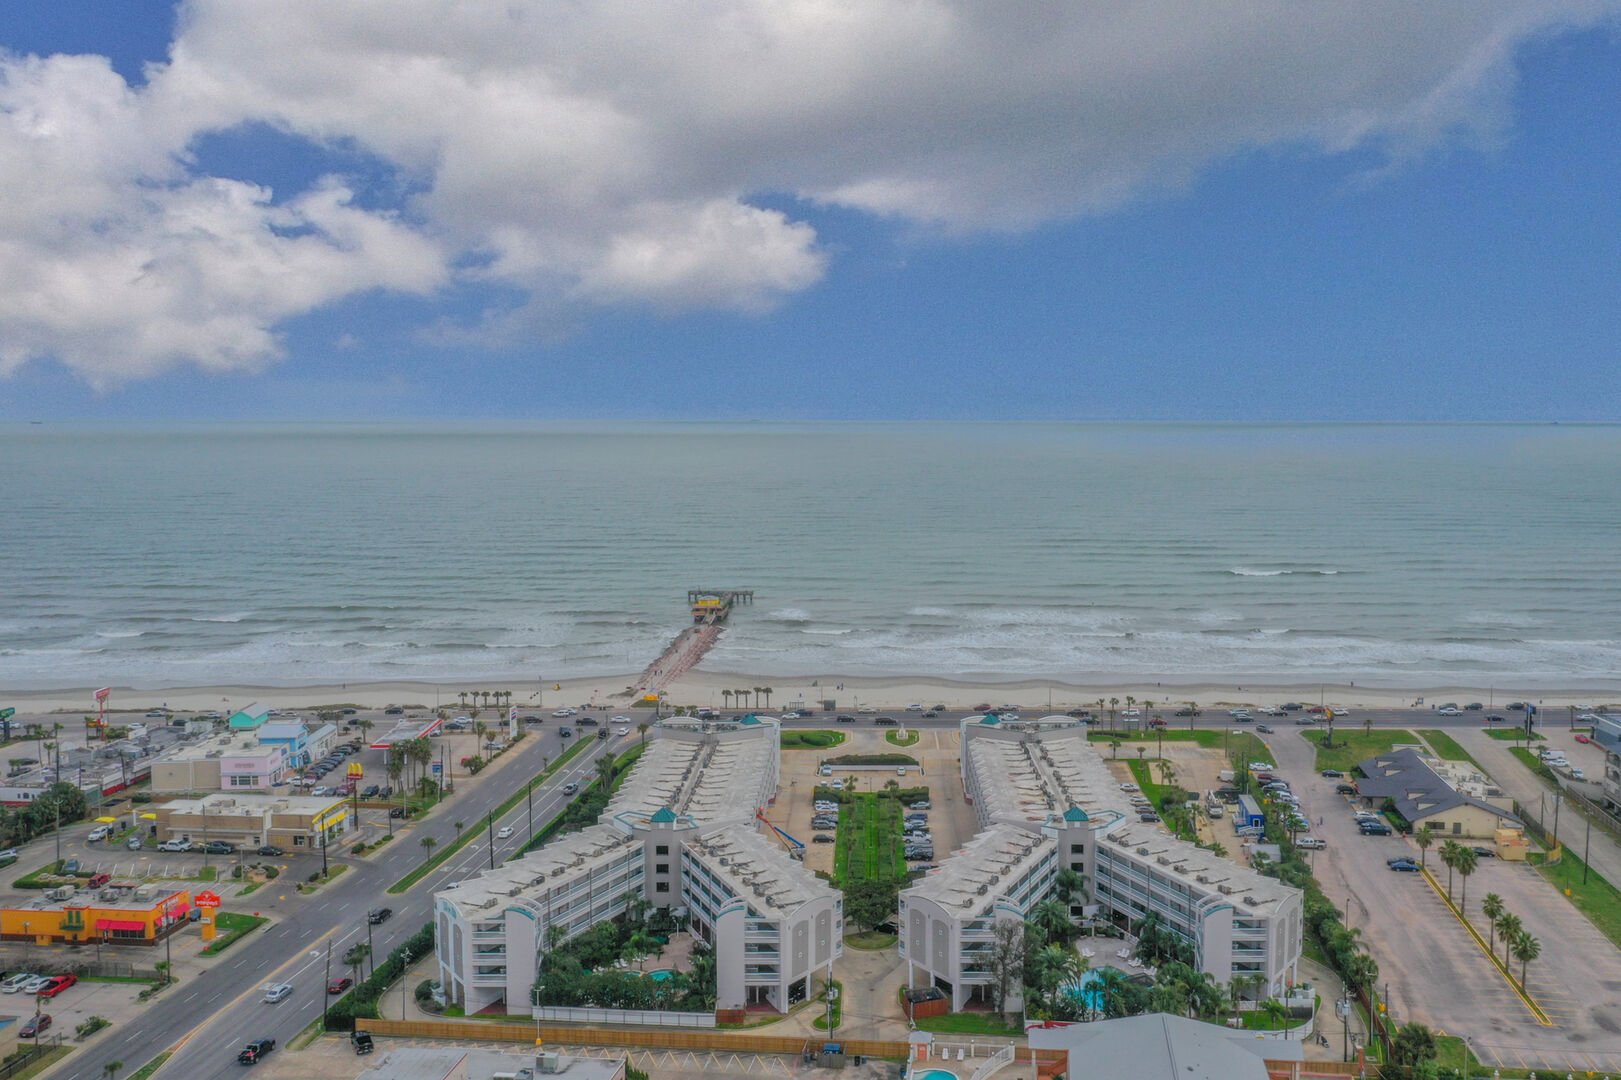 The Casa Del Mar located directly across from Galveston's Babe's Beach!